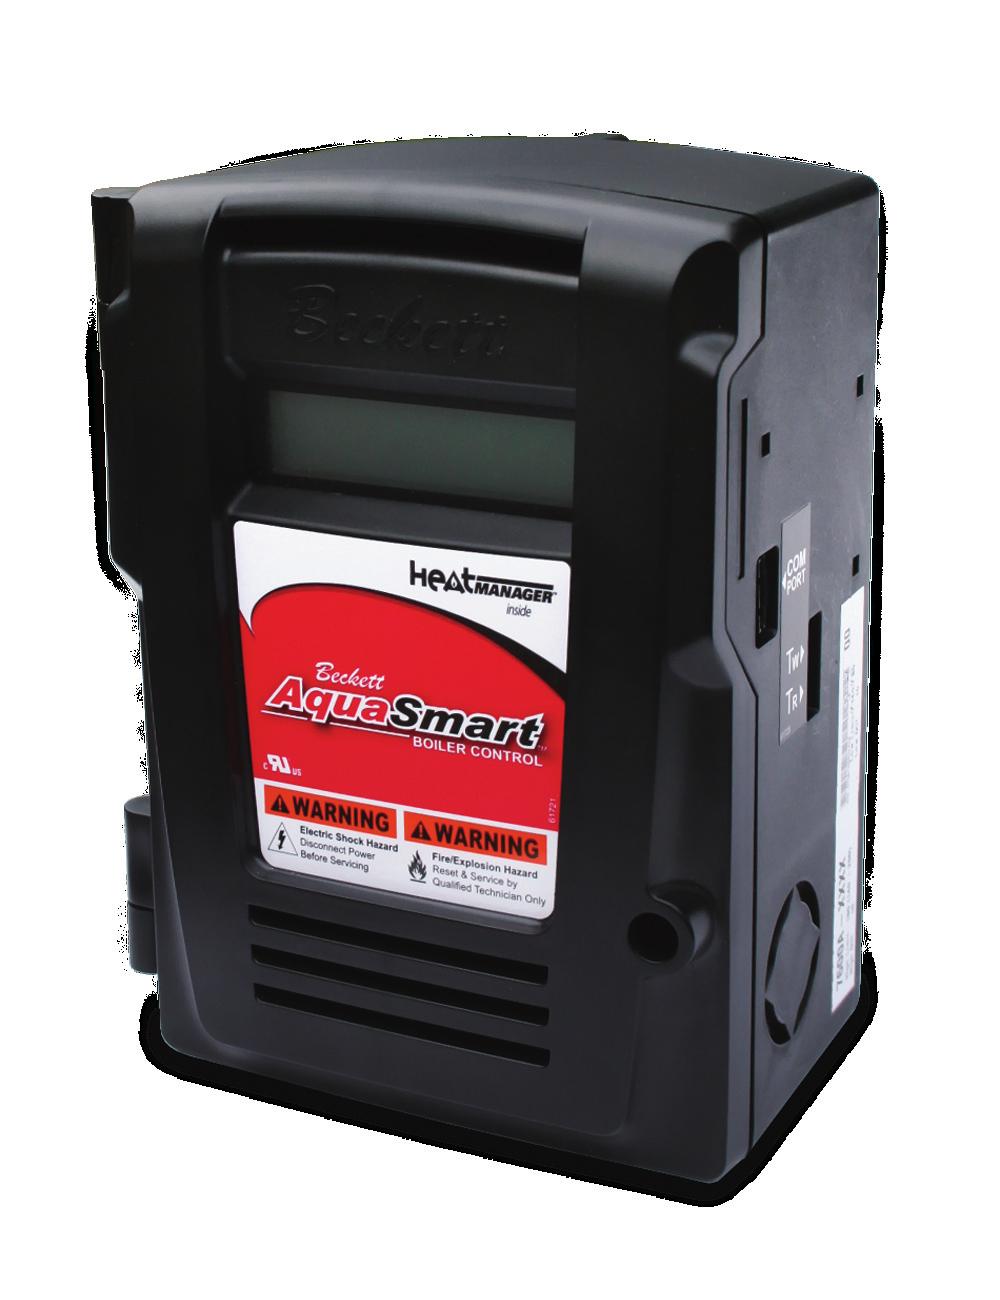 Oil and gas offerings available Self checking sensor Description The Beckett AquaSmart is a patent-pending, advanced boiler control designed for use on residential and light commercial boiler systems.